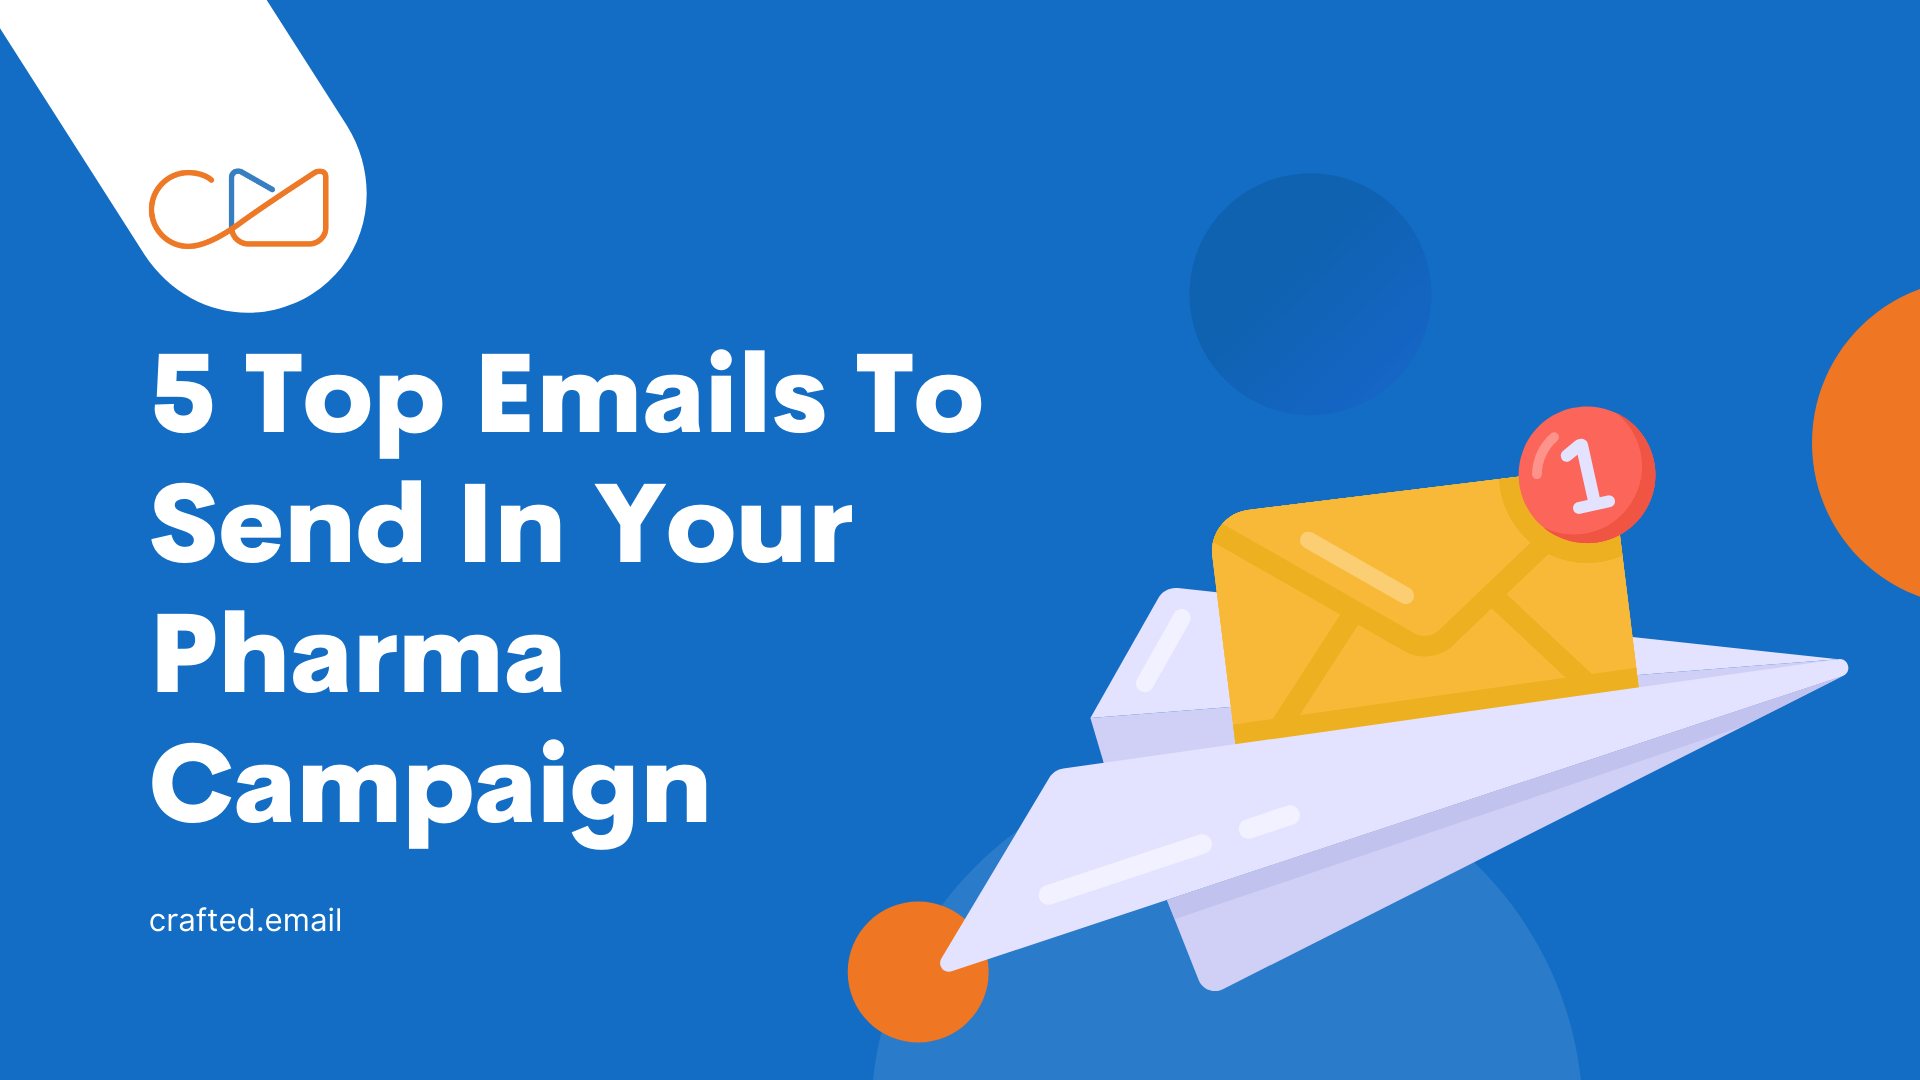 5 Top Emails To Send In Your Pharma Campaign